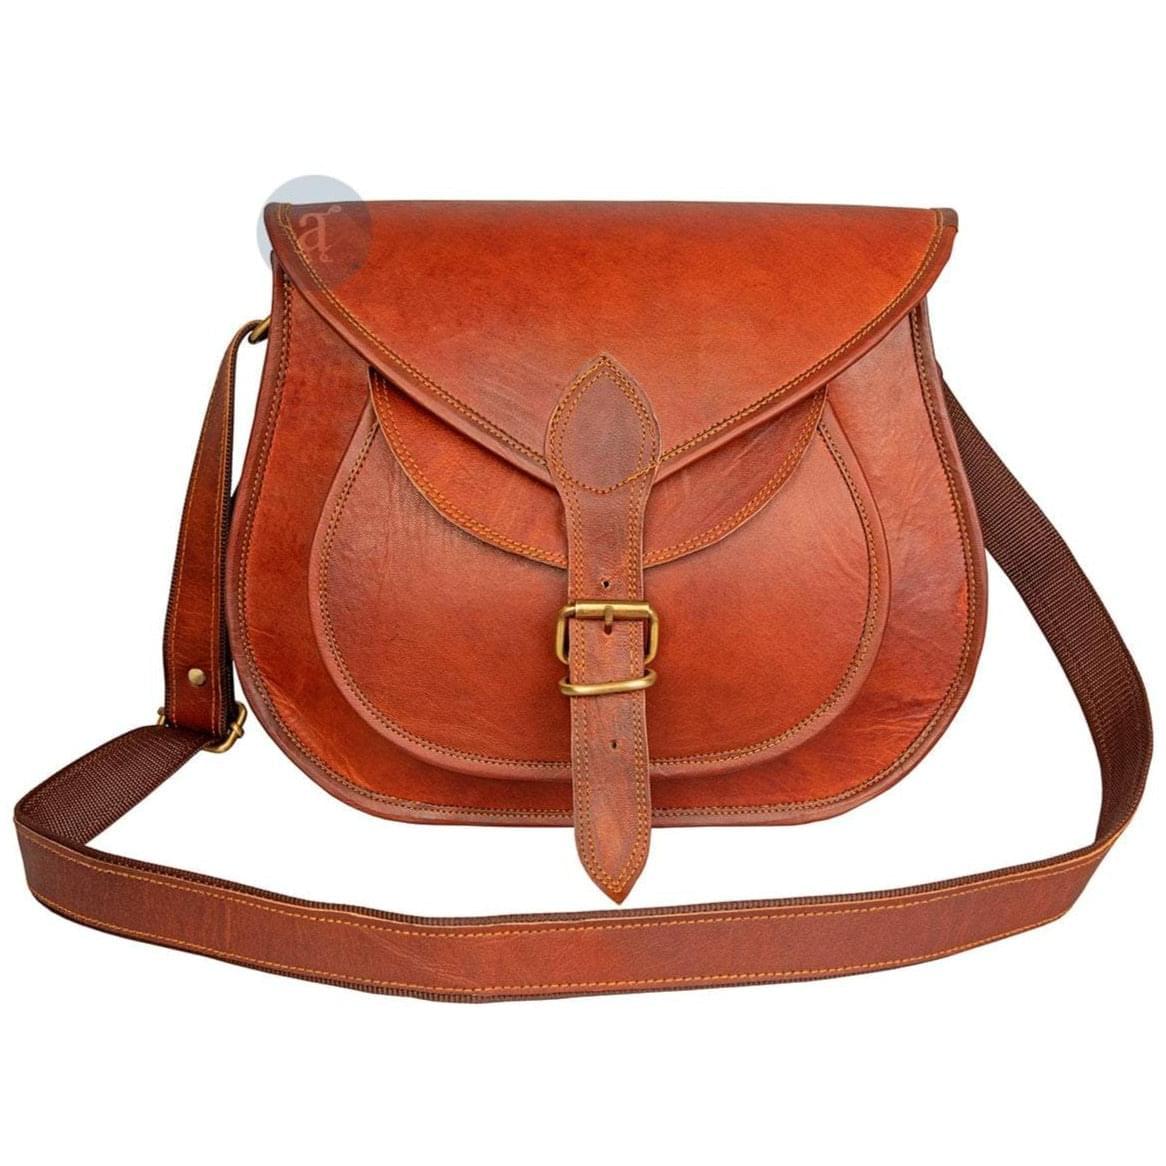 2 Quality Leather Adjustable Slide Convertible Cross Body Bag